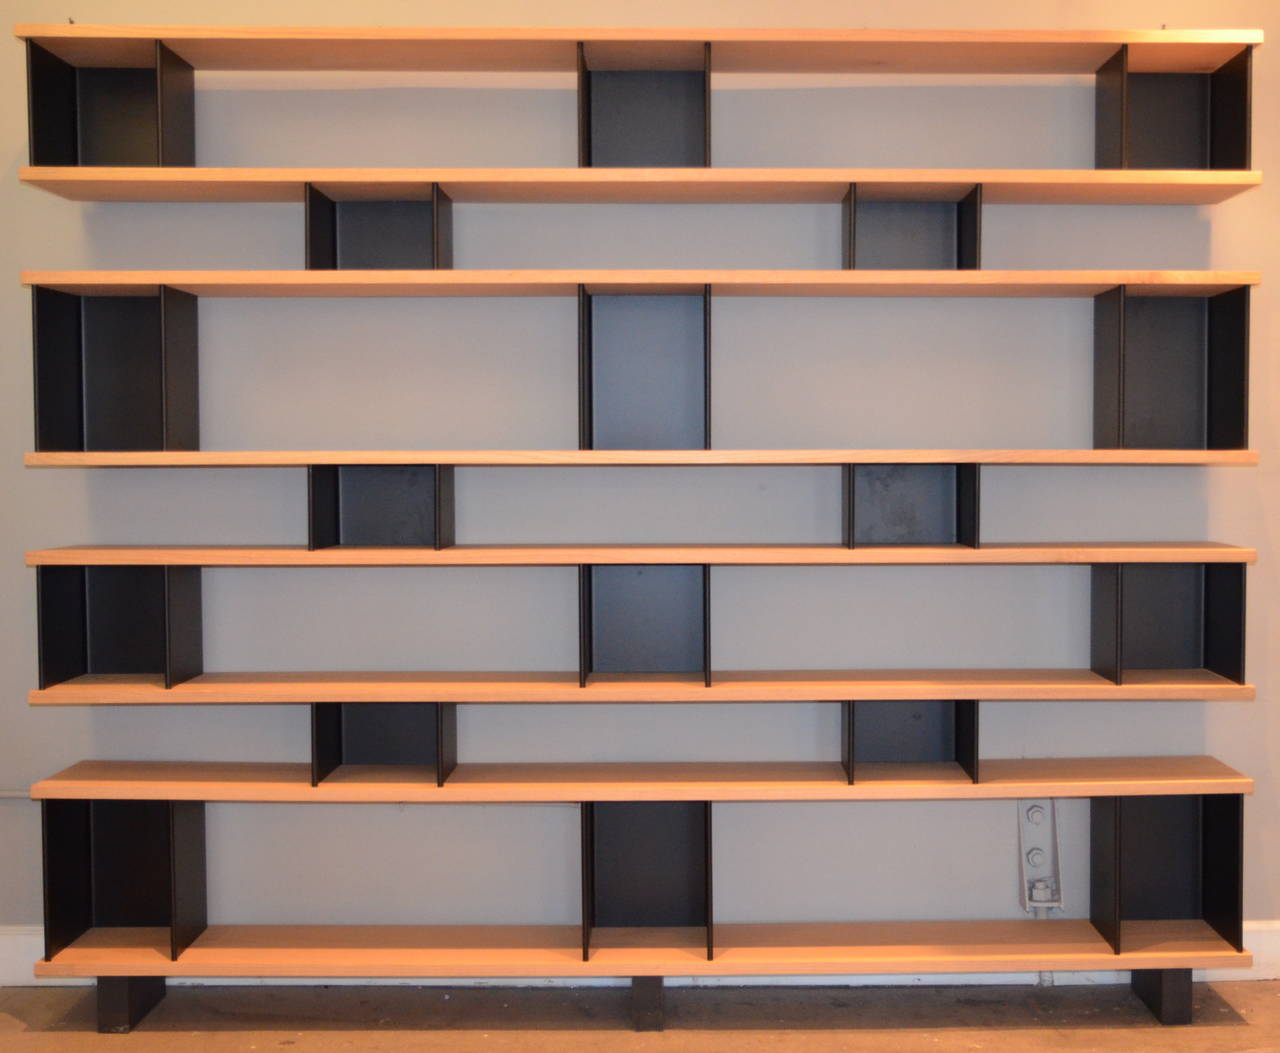 Large 'Horizontale' shelving unit in the style of Charlotte Perriand.

Made of 8 solid clear-coated white oak shelves and 18 matte black powder coated steel spacer elements of three different heights. 

This piece comes as 4 'sandwiched' boxes